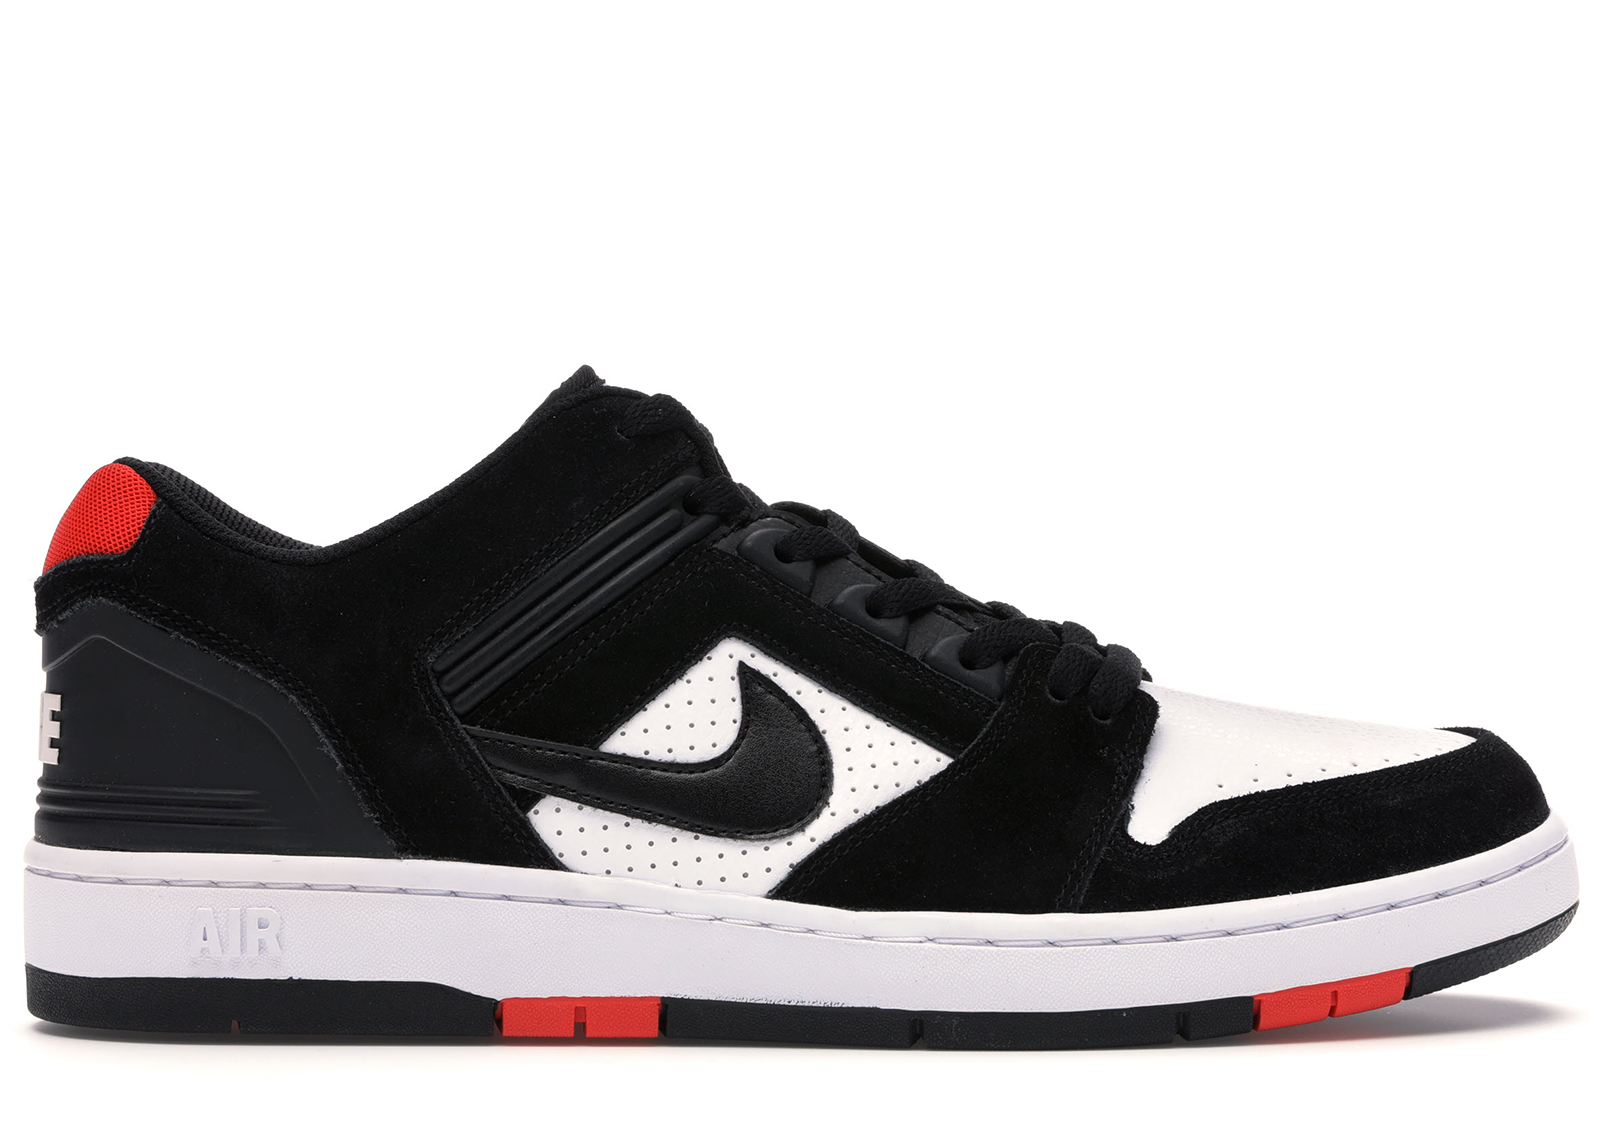 Nike SB Air Force 2 Low Black White Habanero Red - AO0300-006